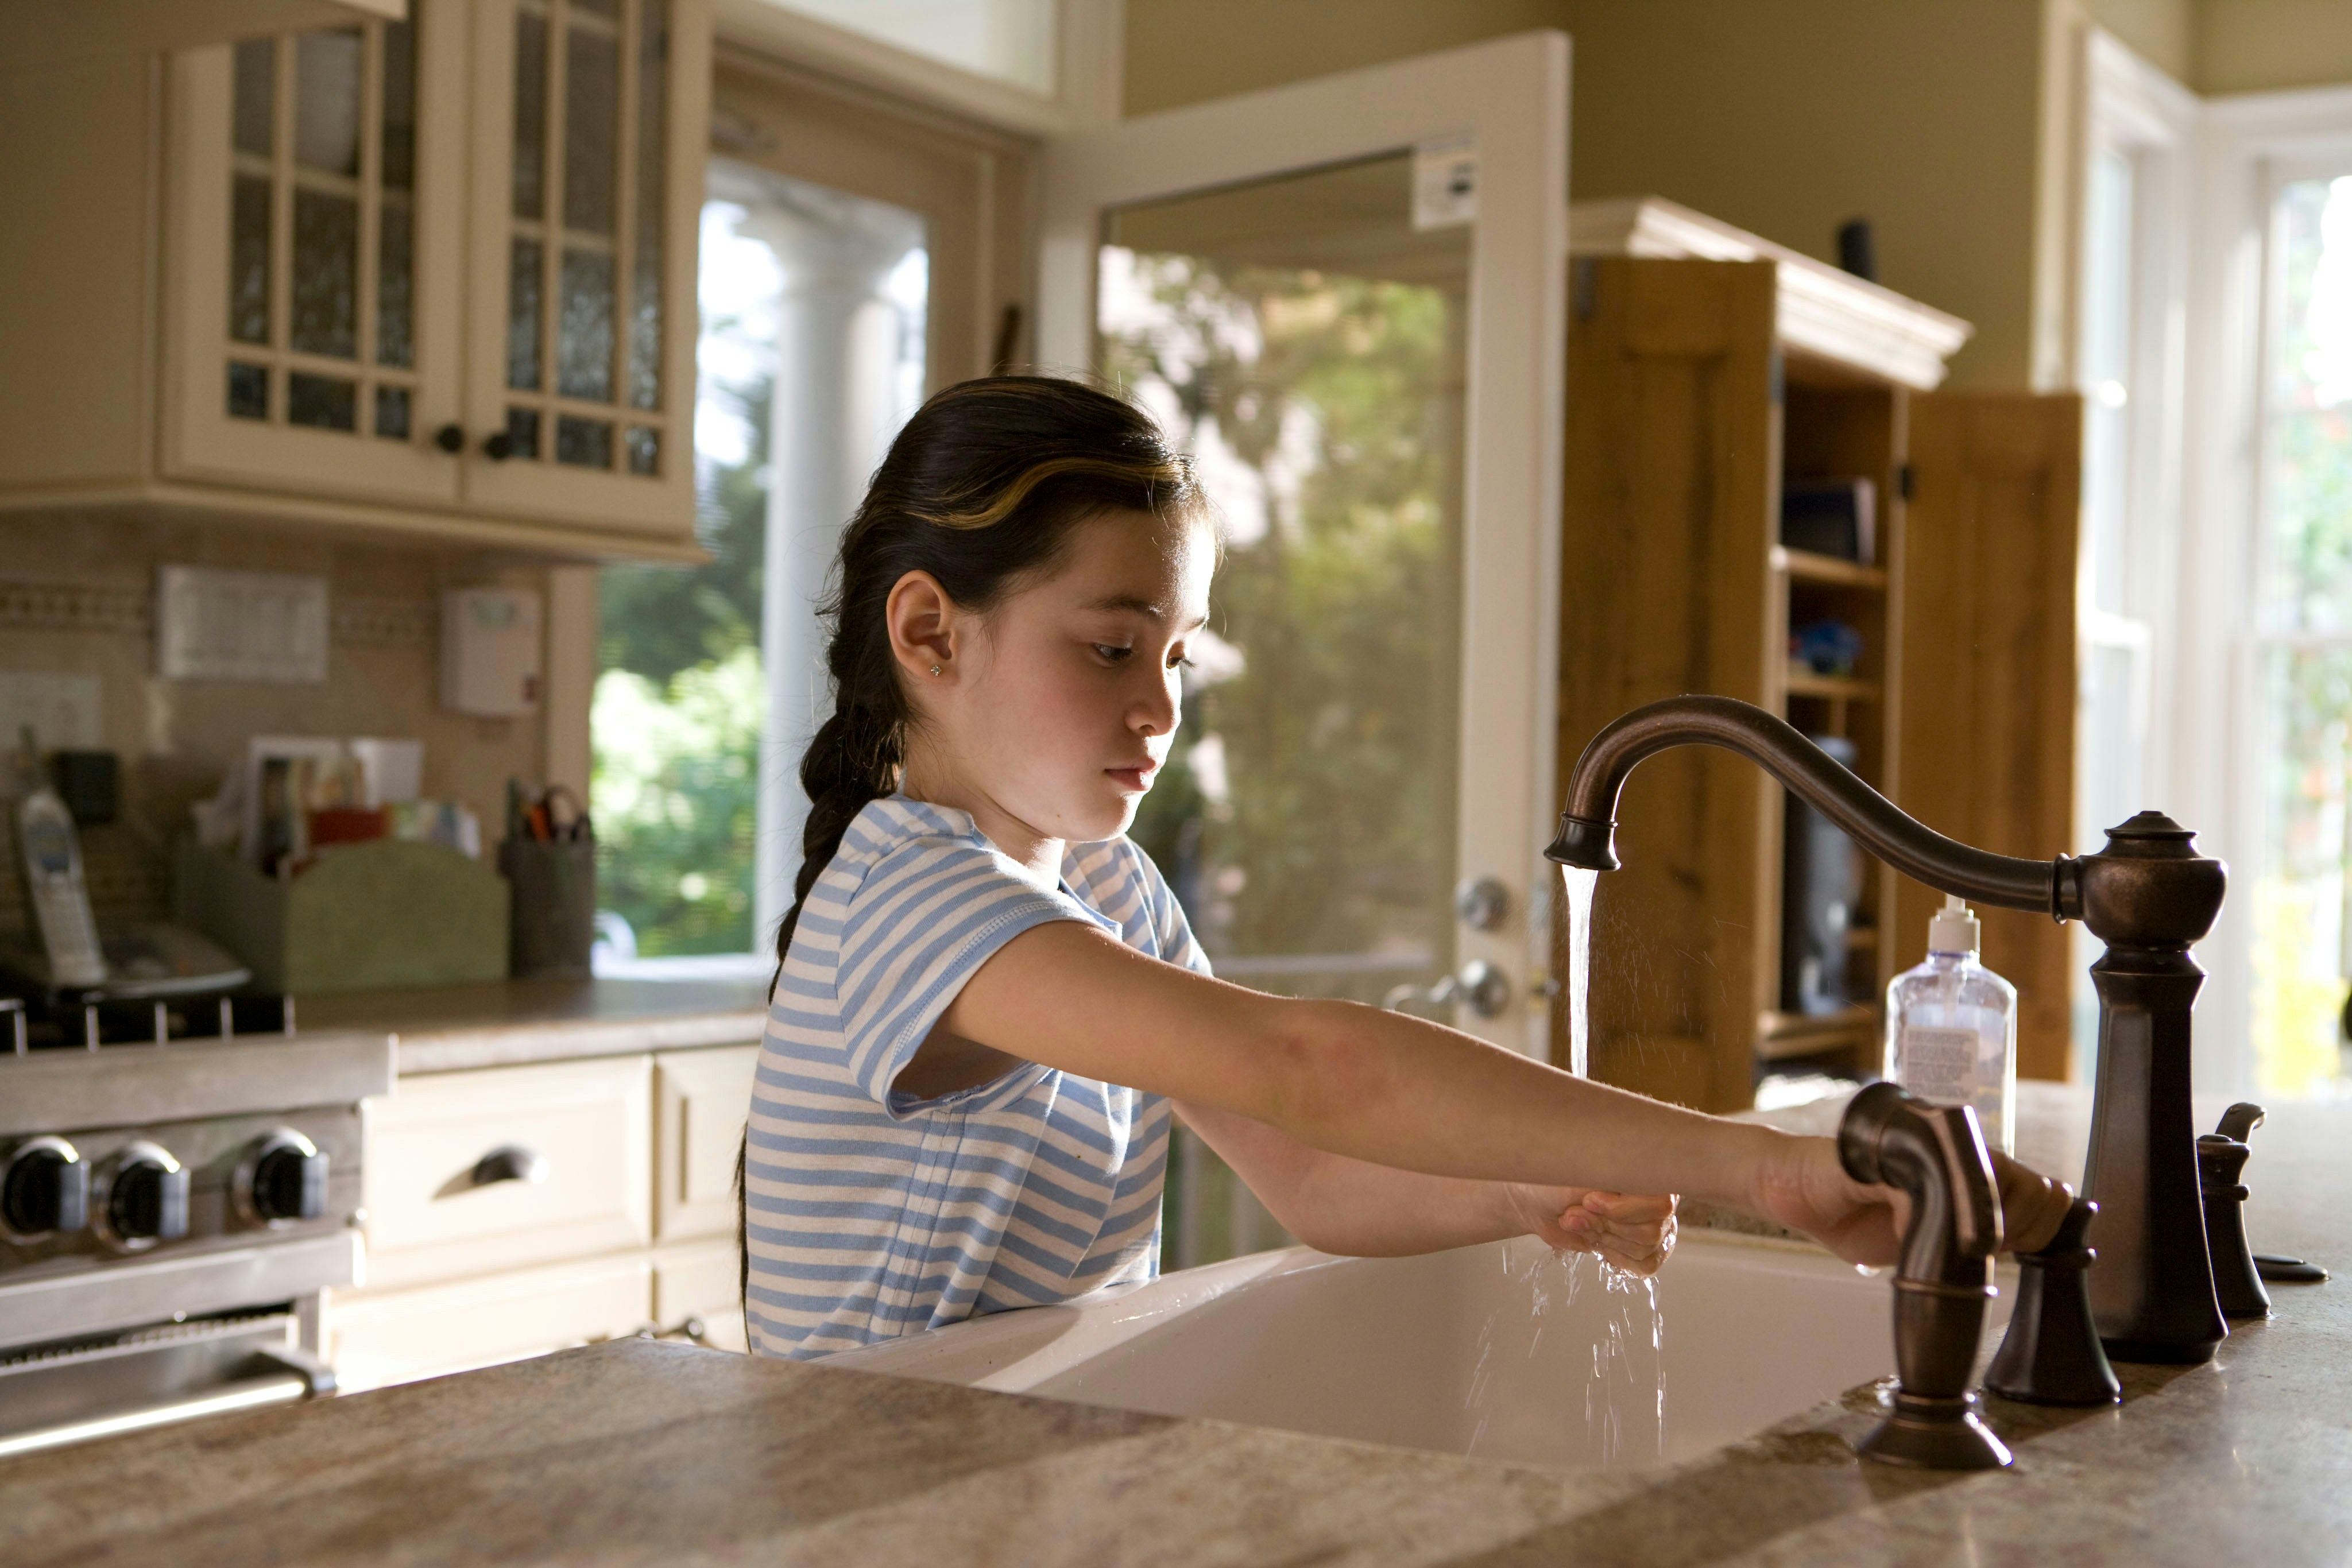 This young girl was shown in the process of properly washing her hands at her kitchen sink, briskly rubbing her soapy hands together under fresh running tap water, in order to remove germs, and contaminants, thereby, reducing the spread of pathogens, and her ingestion of environmental chemicals or toxins. Children are taught to recite the Happy Birthday song, during hand washing, allotting enough time to completely clean their hands.